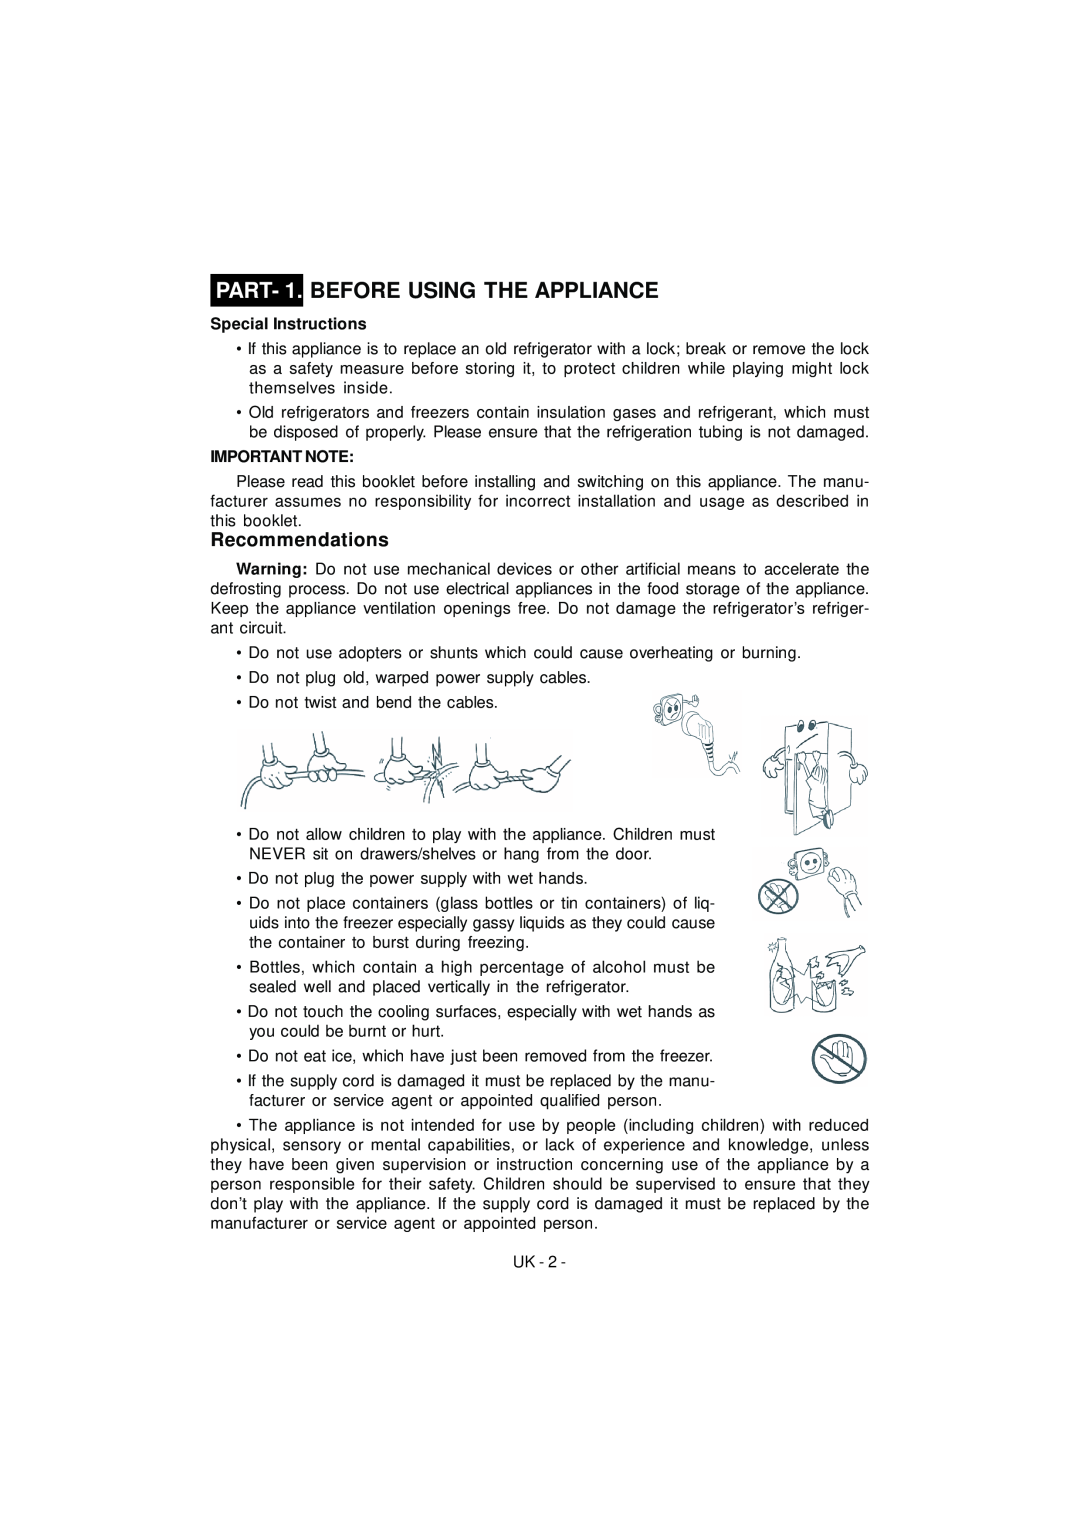 Smeg FD43APBNF, FD43APXNF manual PART- 1. BEFORE USING THE APPLIANCE, Recommendations, Special Instructions, Important Note 